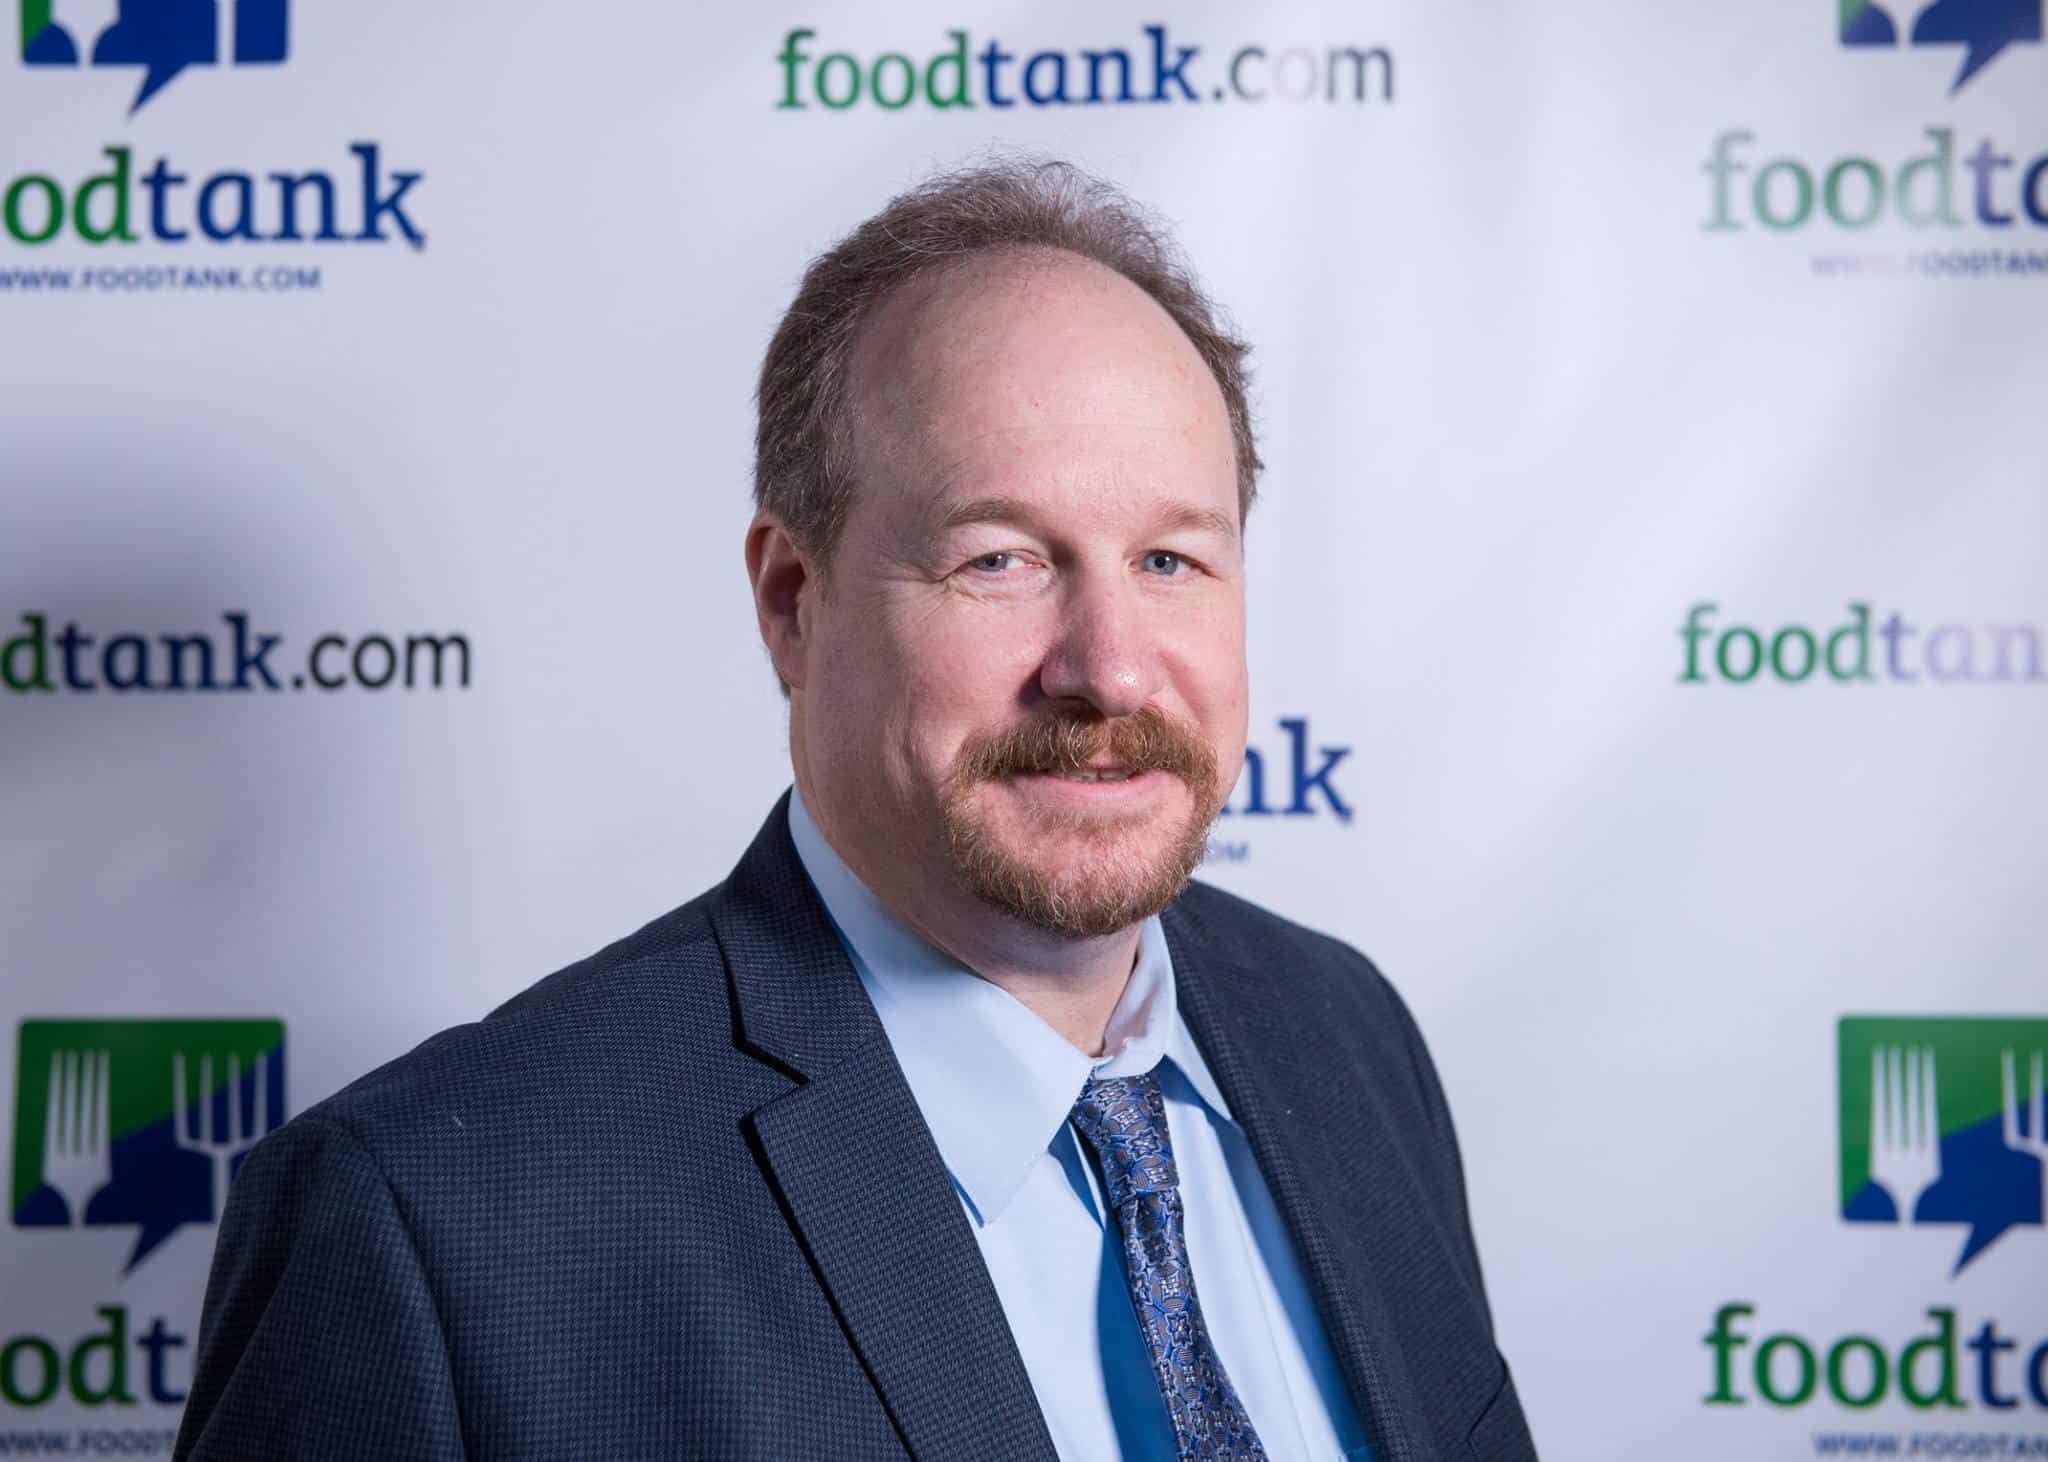 Jason Huffman, the editor of POLITICO Pro Agriculture and Pro Trade, is speaking at the third annual D.C. Food Tank Summit.